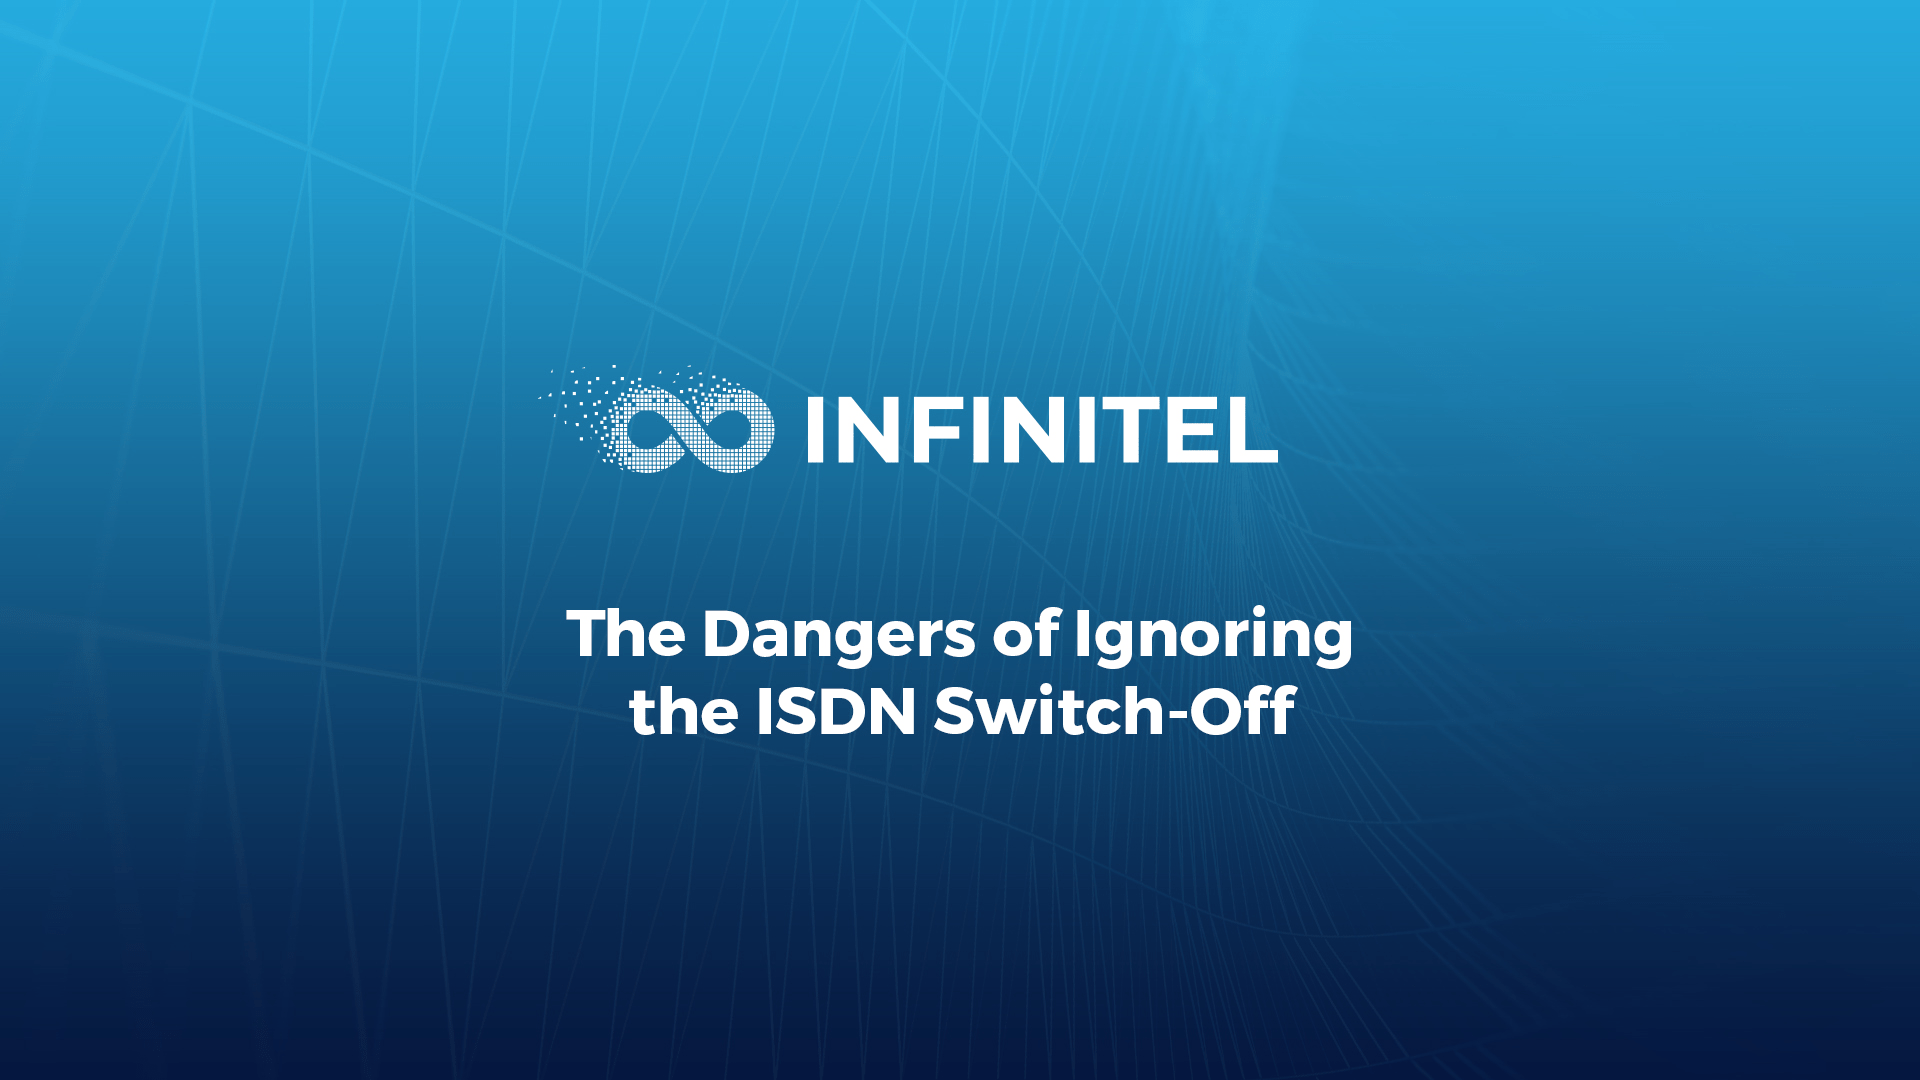 The Dangers of Ignoring the ISDN Switch-Off